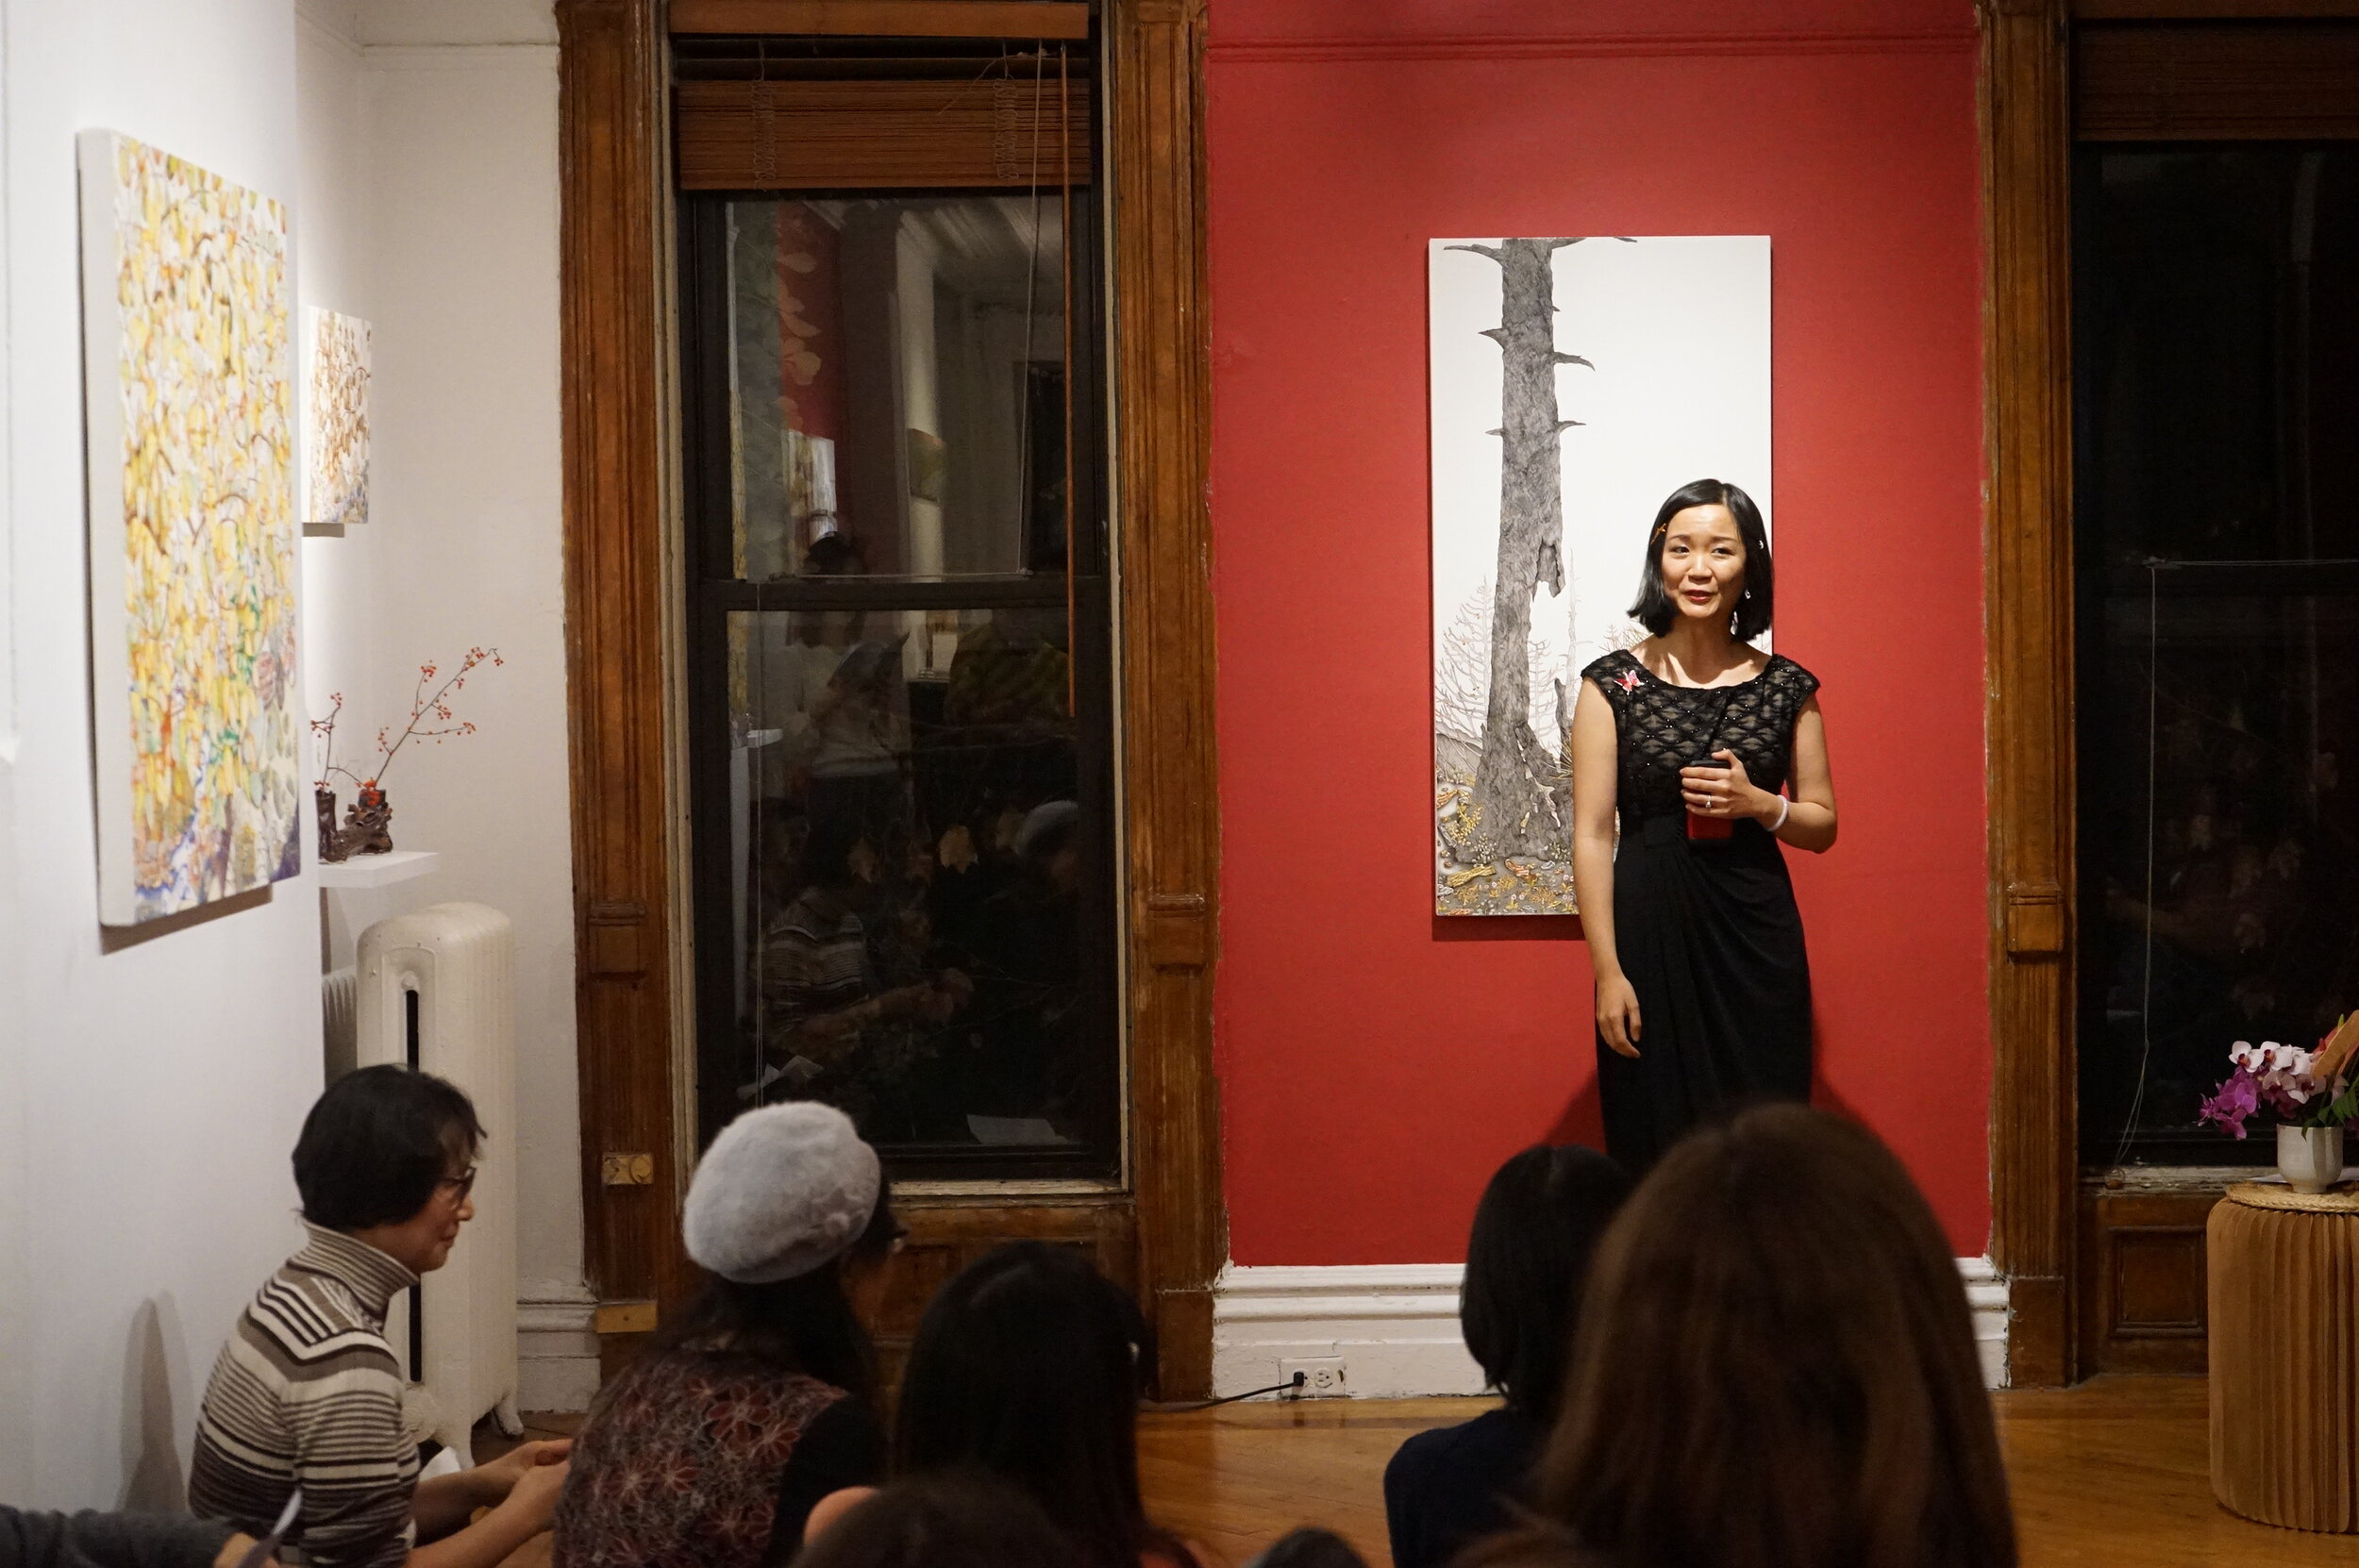   Beneath the Singing Boughs - Di Zhao Vocal Recital , photo by Hansen Zhang, courtesy Fou Gallery. 